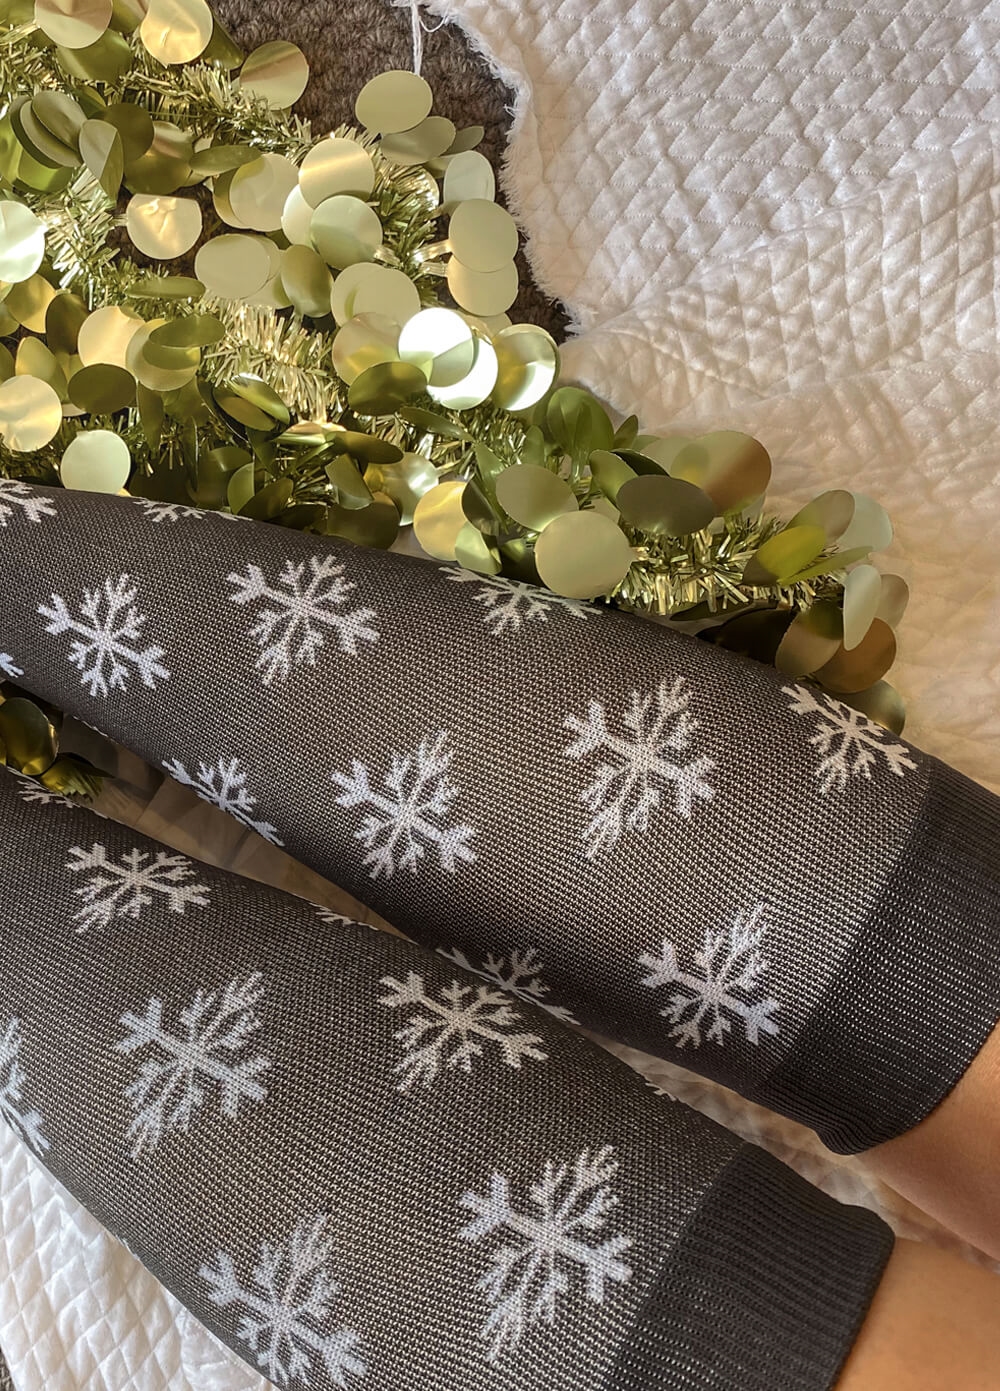 Mama Sox - Excite Maternity Compression Socks in Grey Snowflake